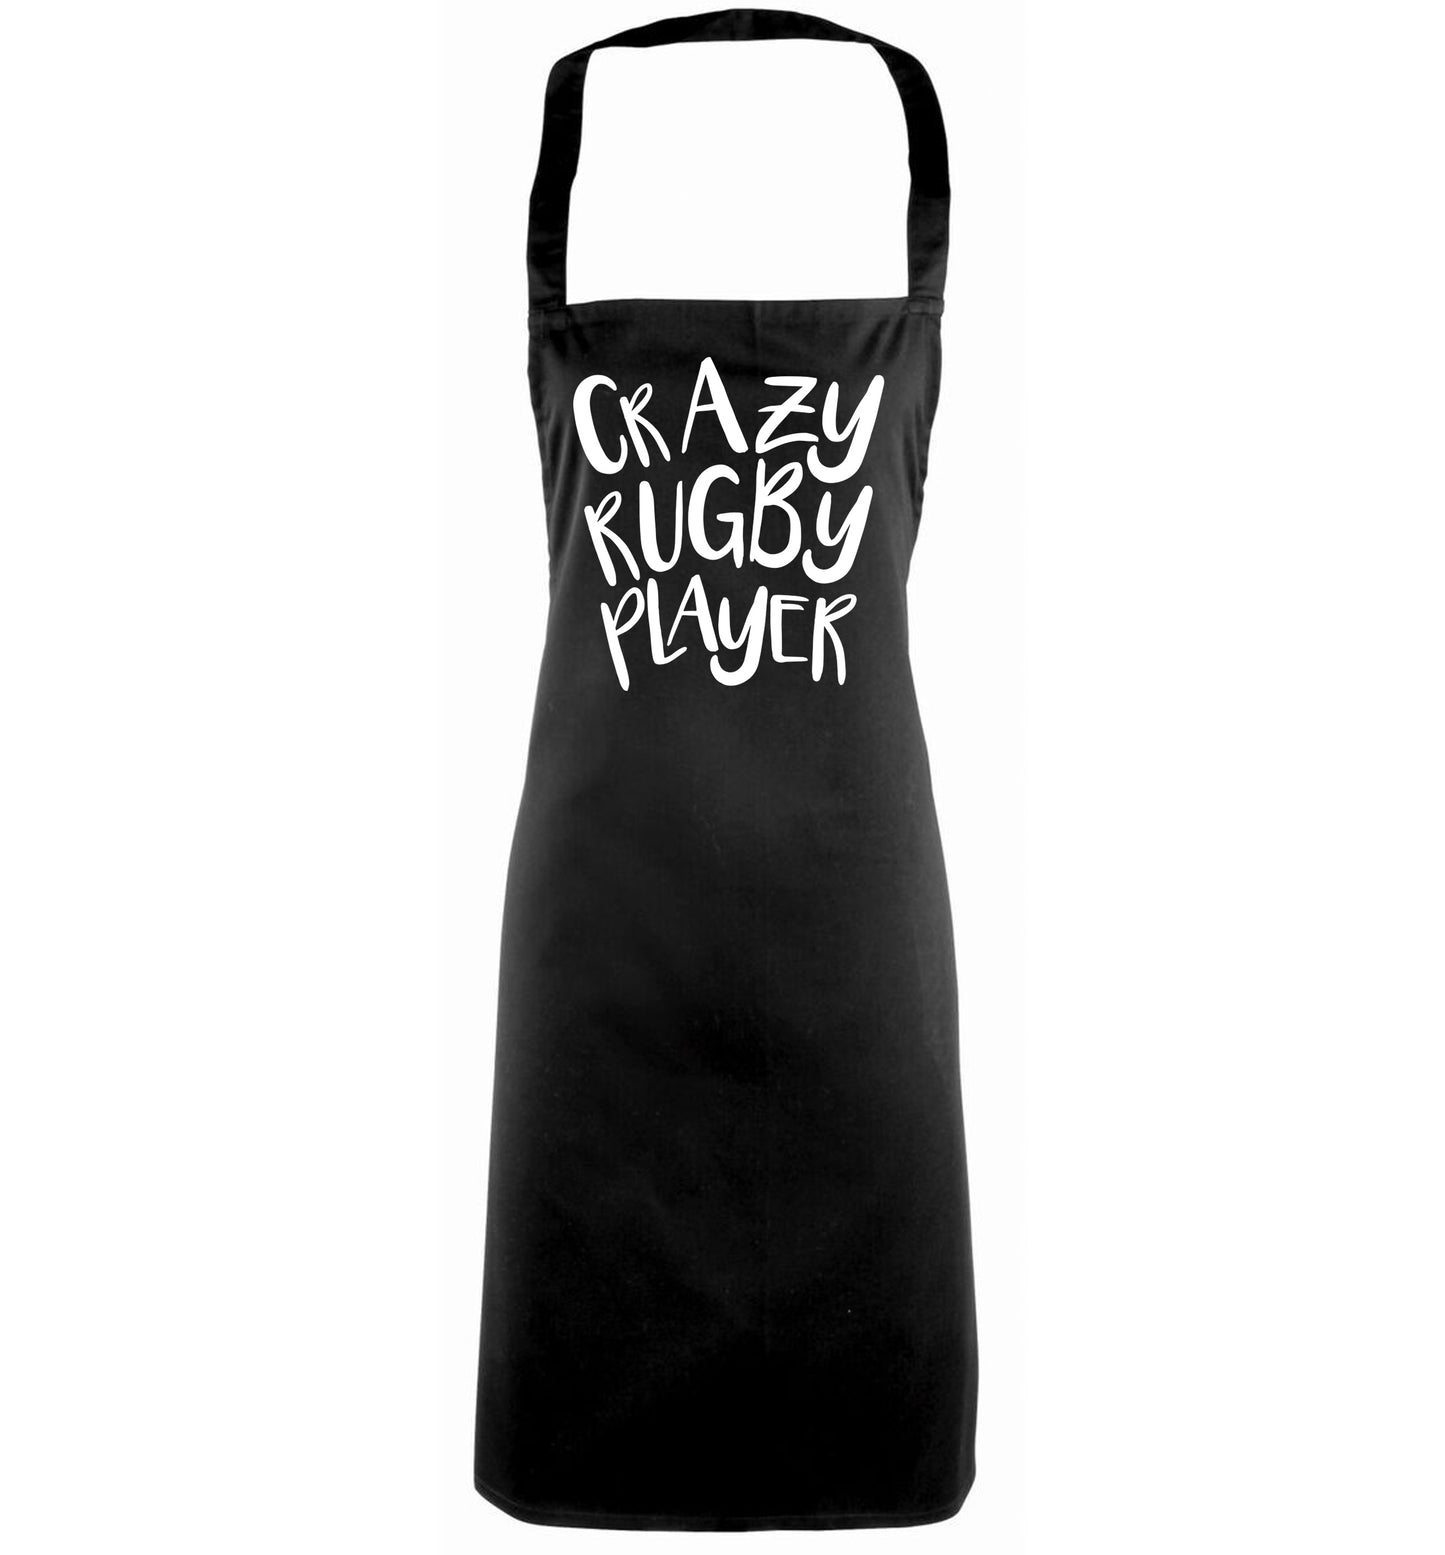 Crazy rugby player black apron